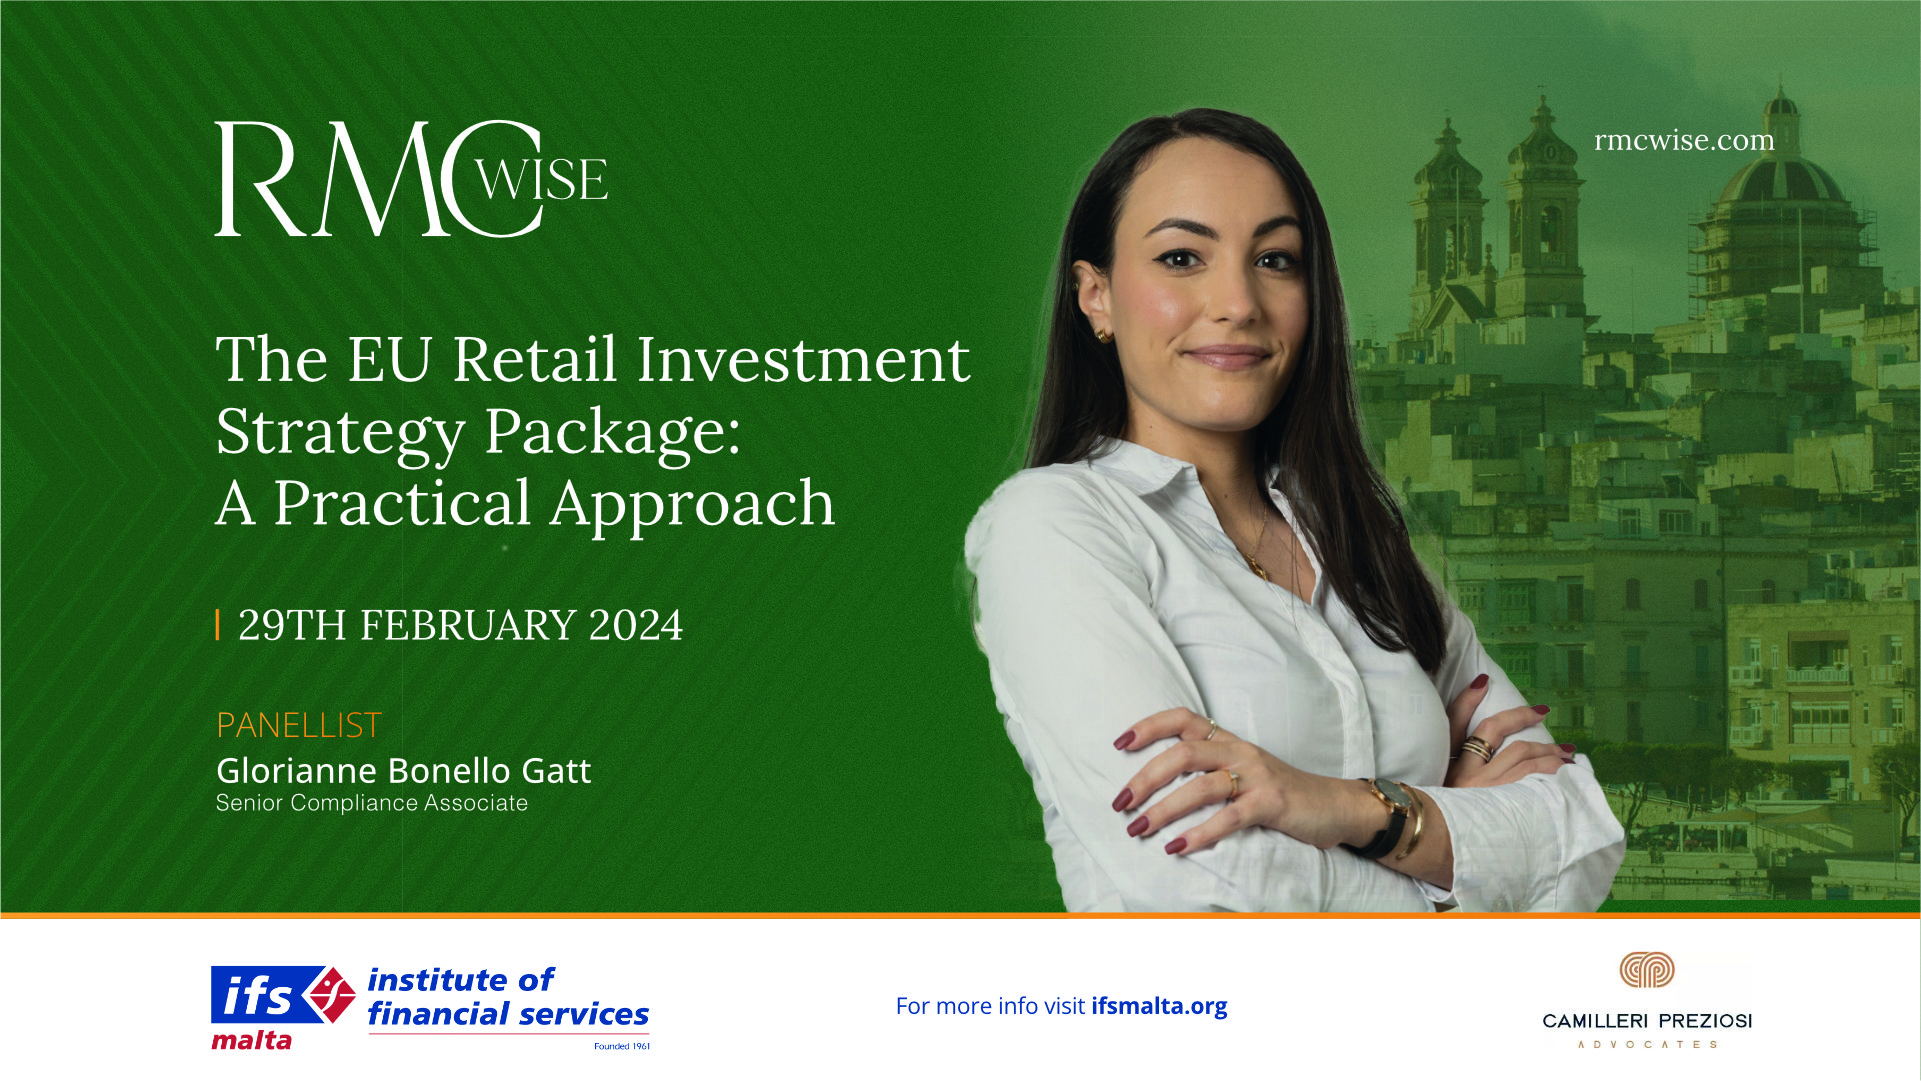 The Eu Retail Investment Strategy Package: A Pratical Approach